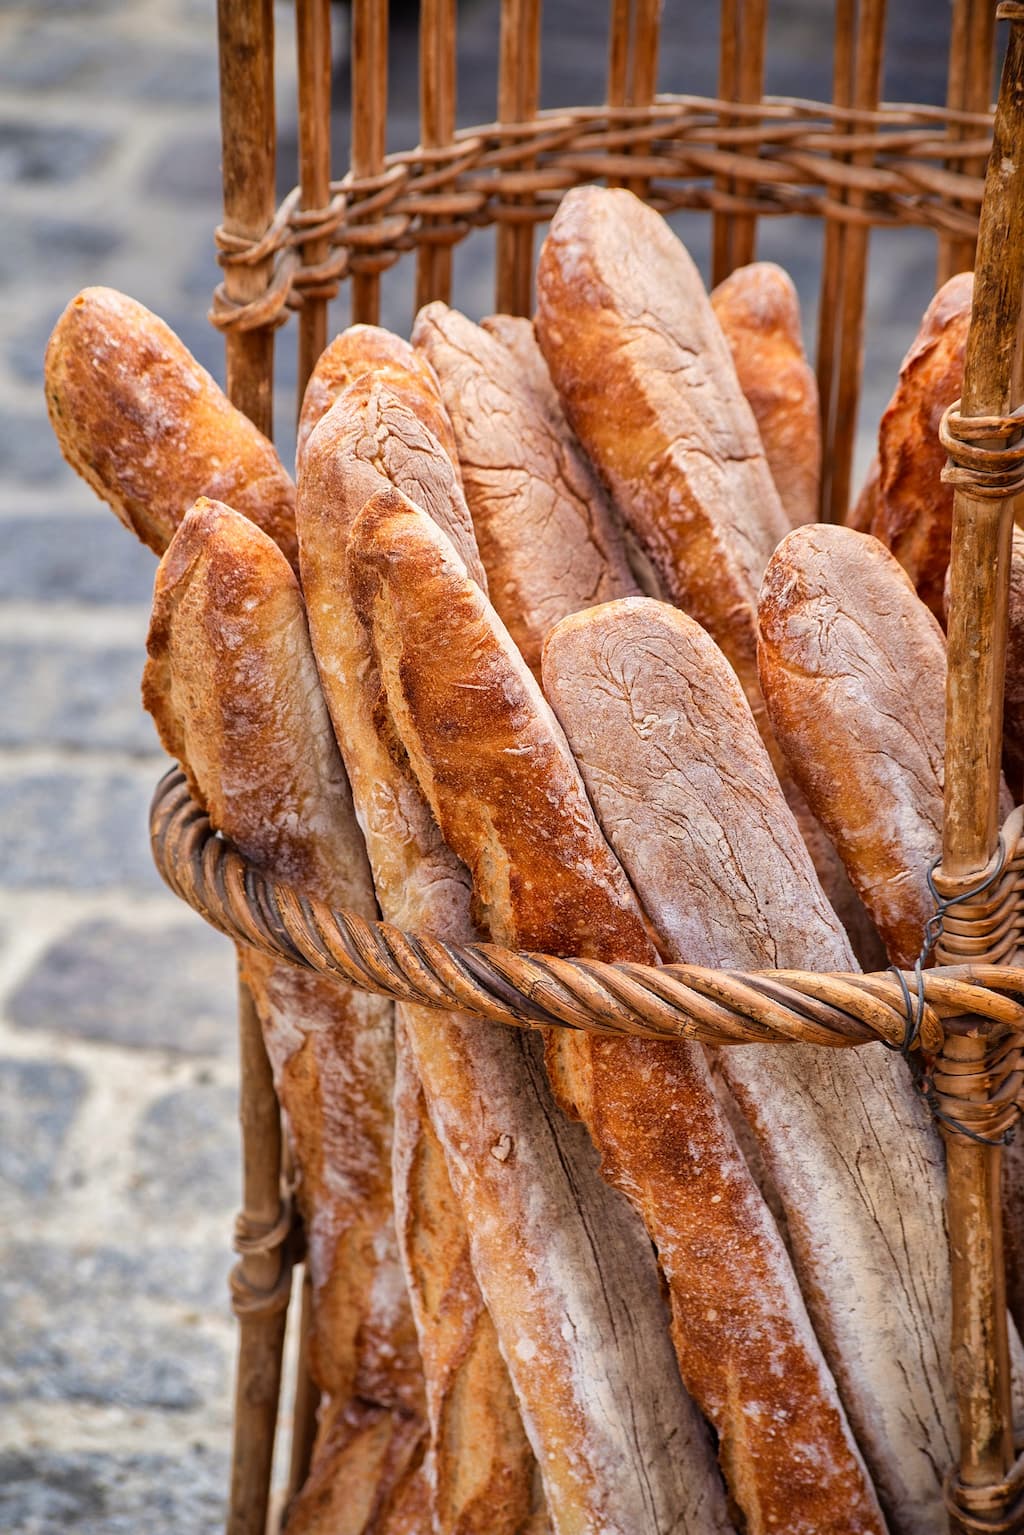 Baguette is is one of the most famous French things.